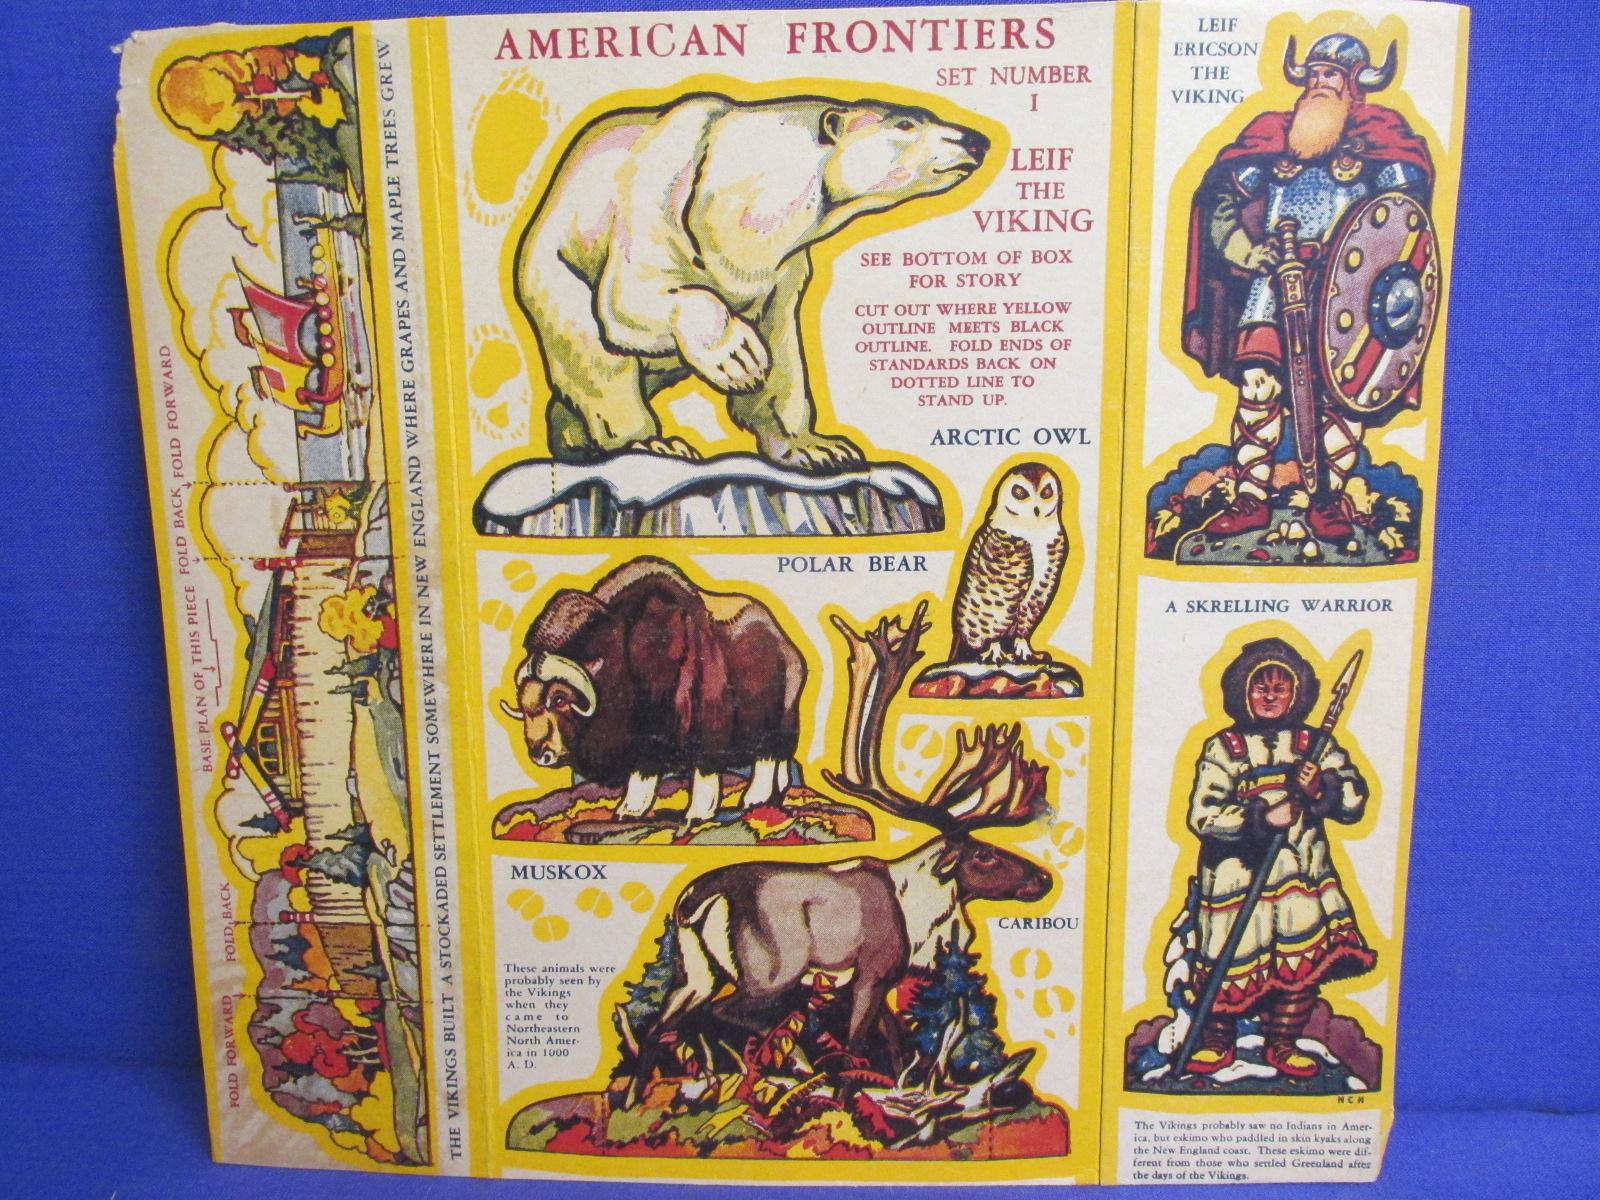 Quaker Puffed Wheat (1930's) Cereal Box cut-outs “American Frontiers” #1 & #2